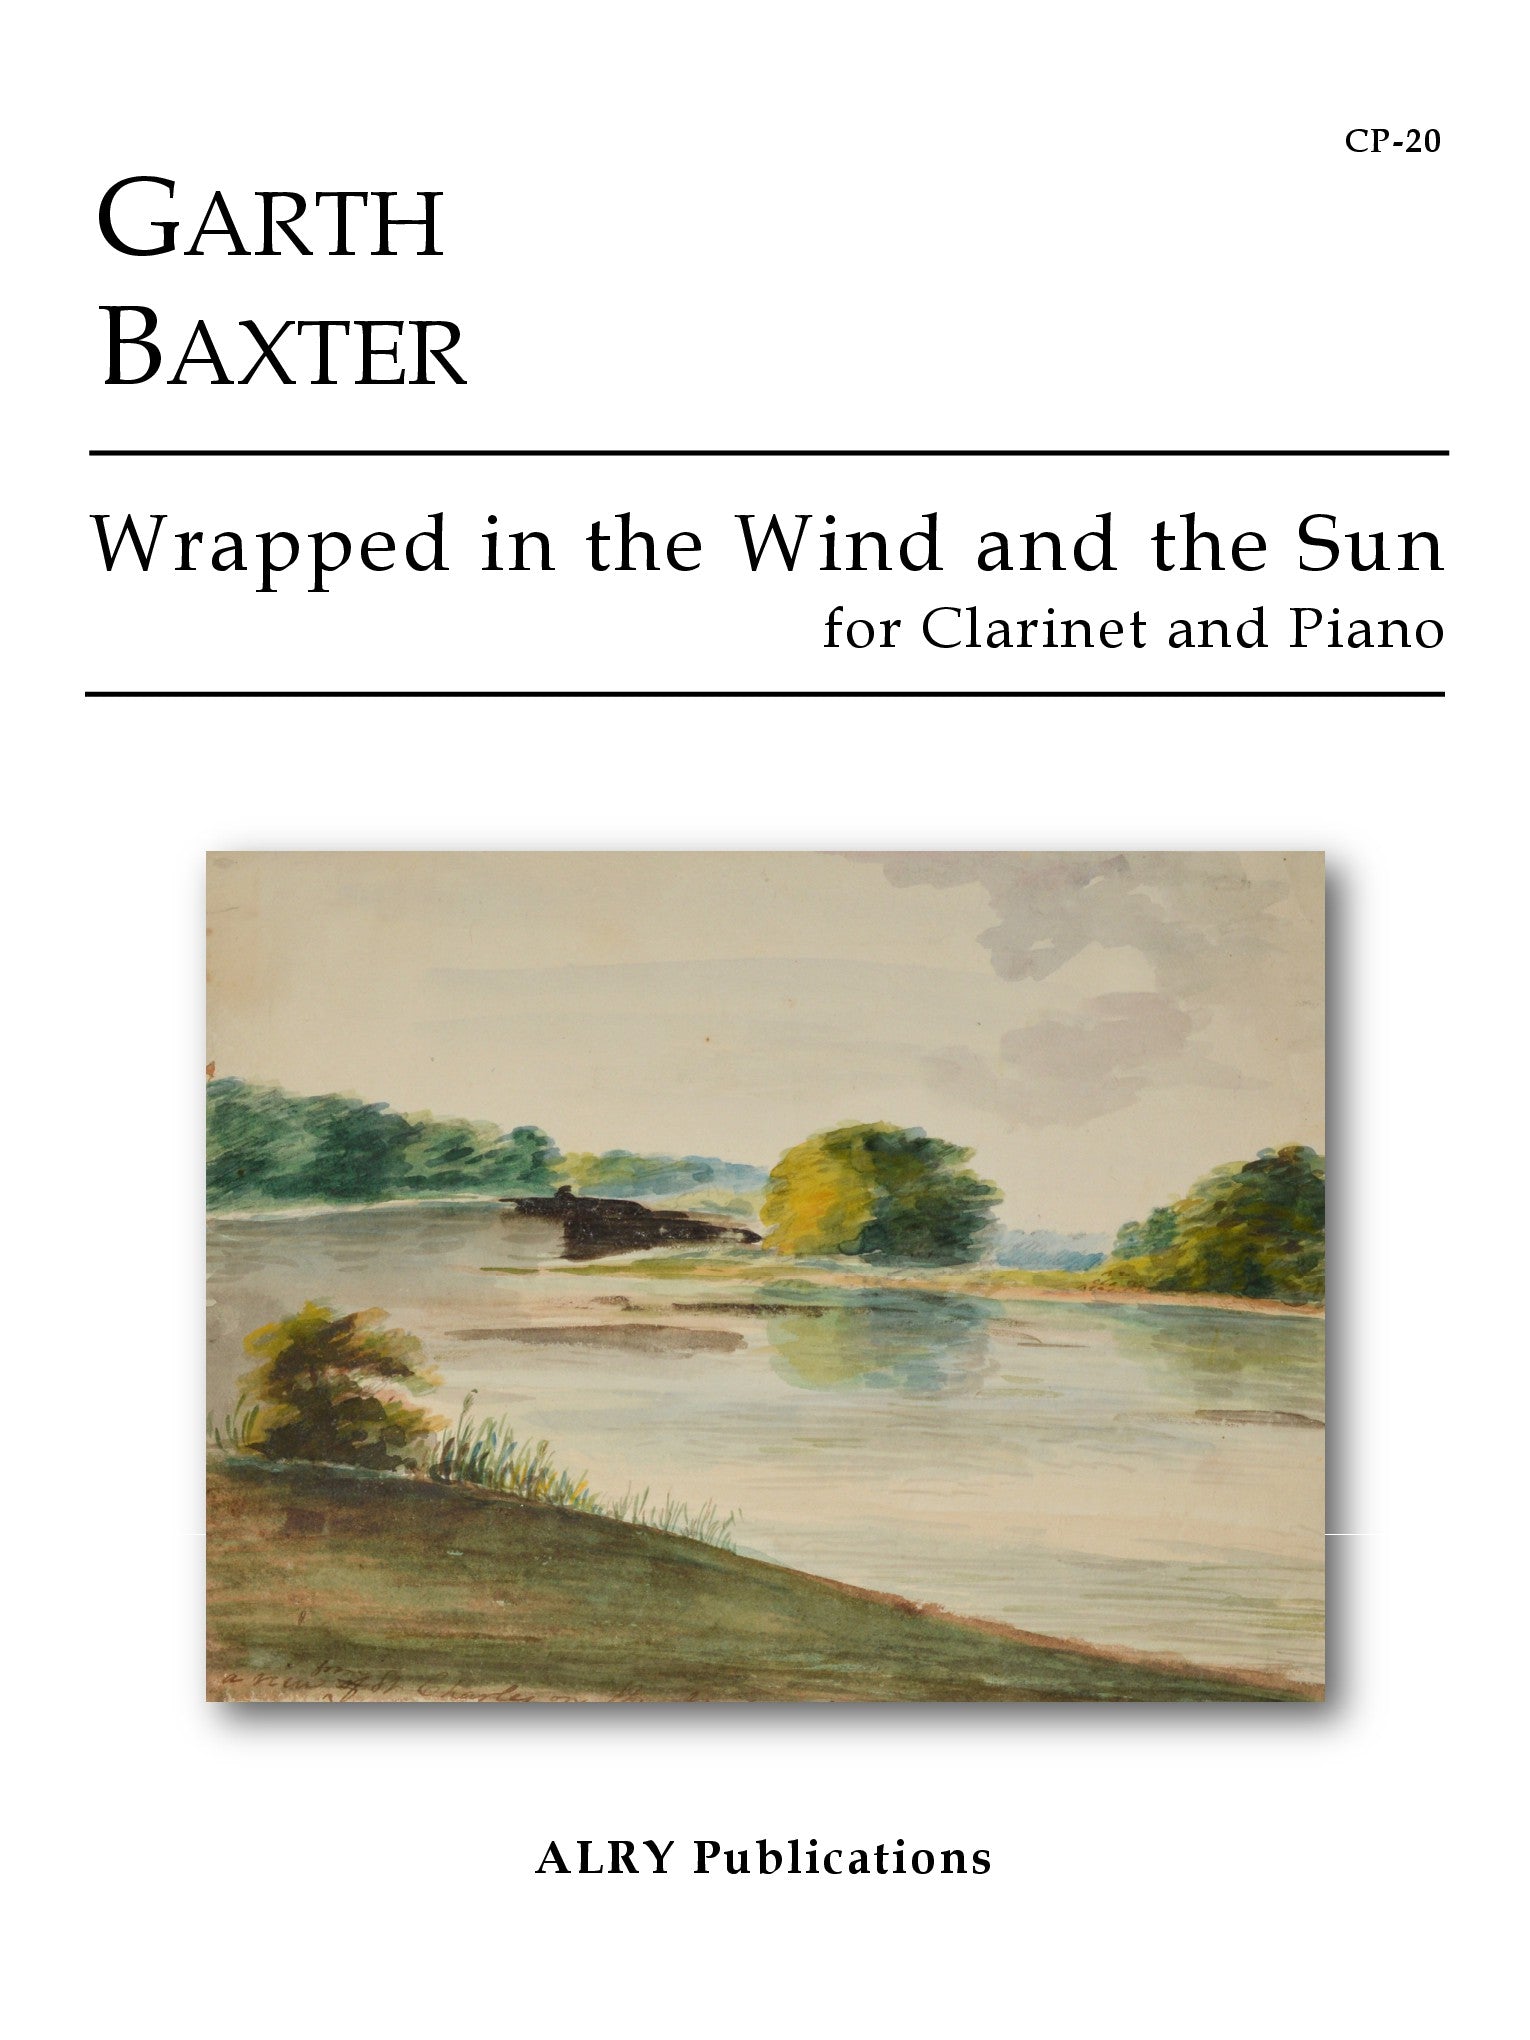 Baxter - Wrapped in the Wind and the Sun for Clarinet and Piano